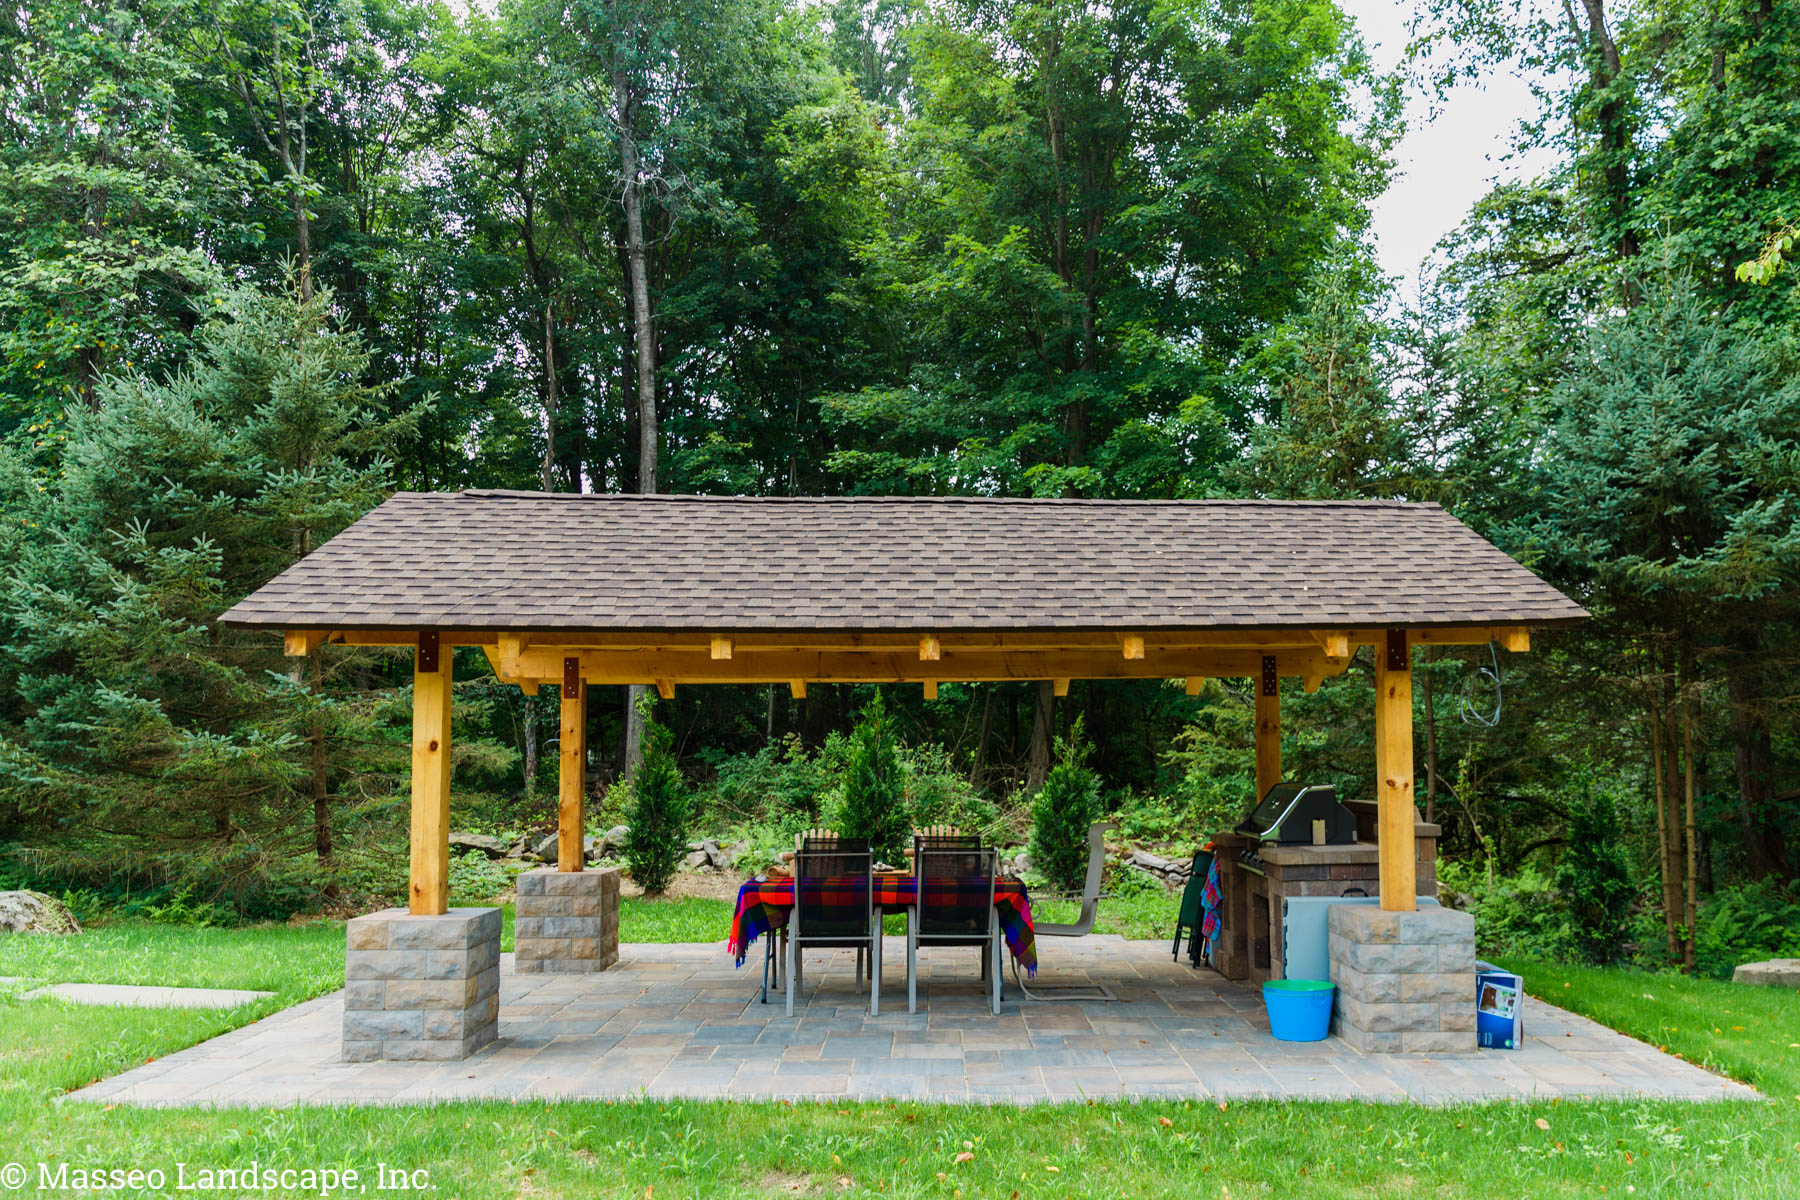 Belgard patio and custom built wooden pavilion built by Masseo Landscape, Inc., landscape contractors in Highland, NY.